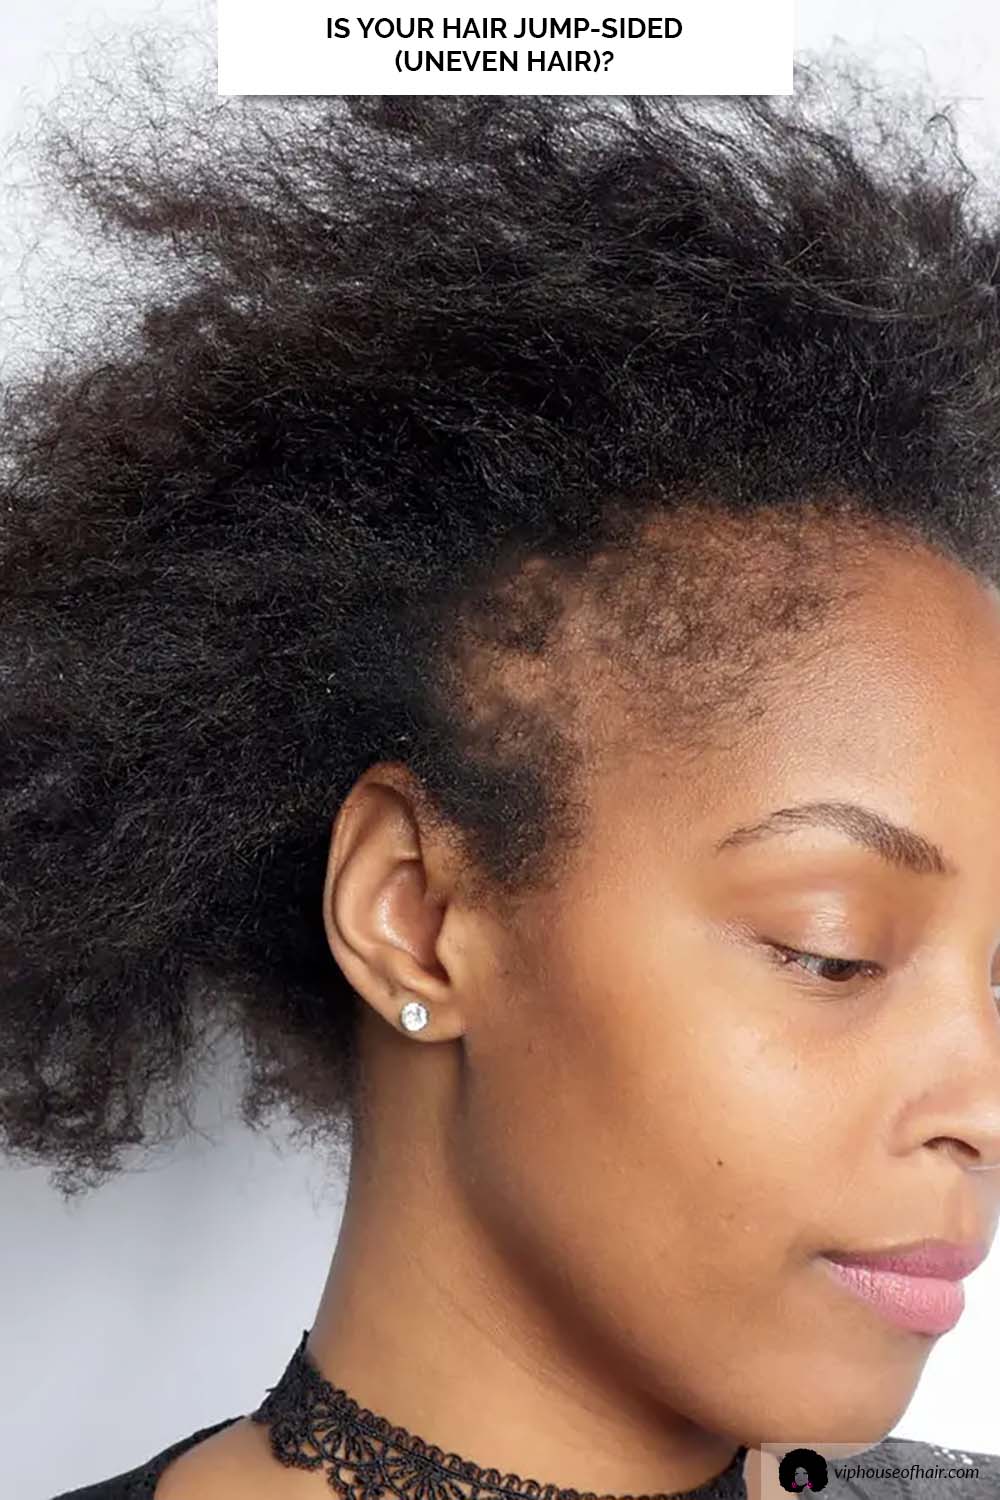 Is Your Hair Jump-Sided (Uneven Hair)?